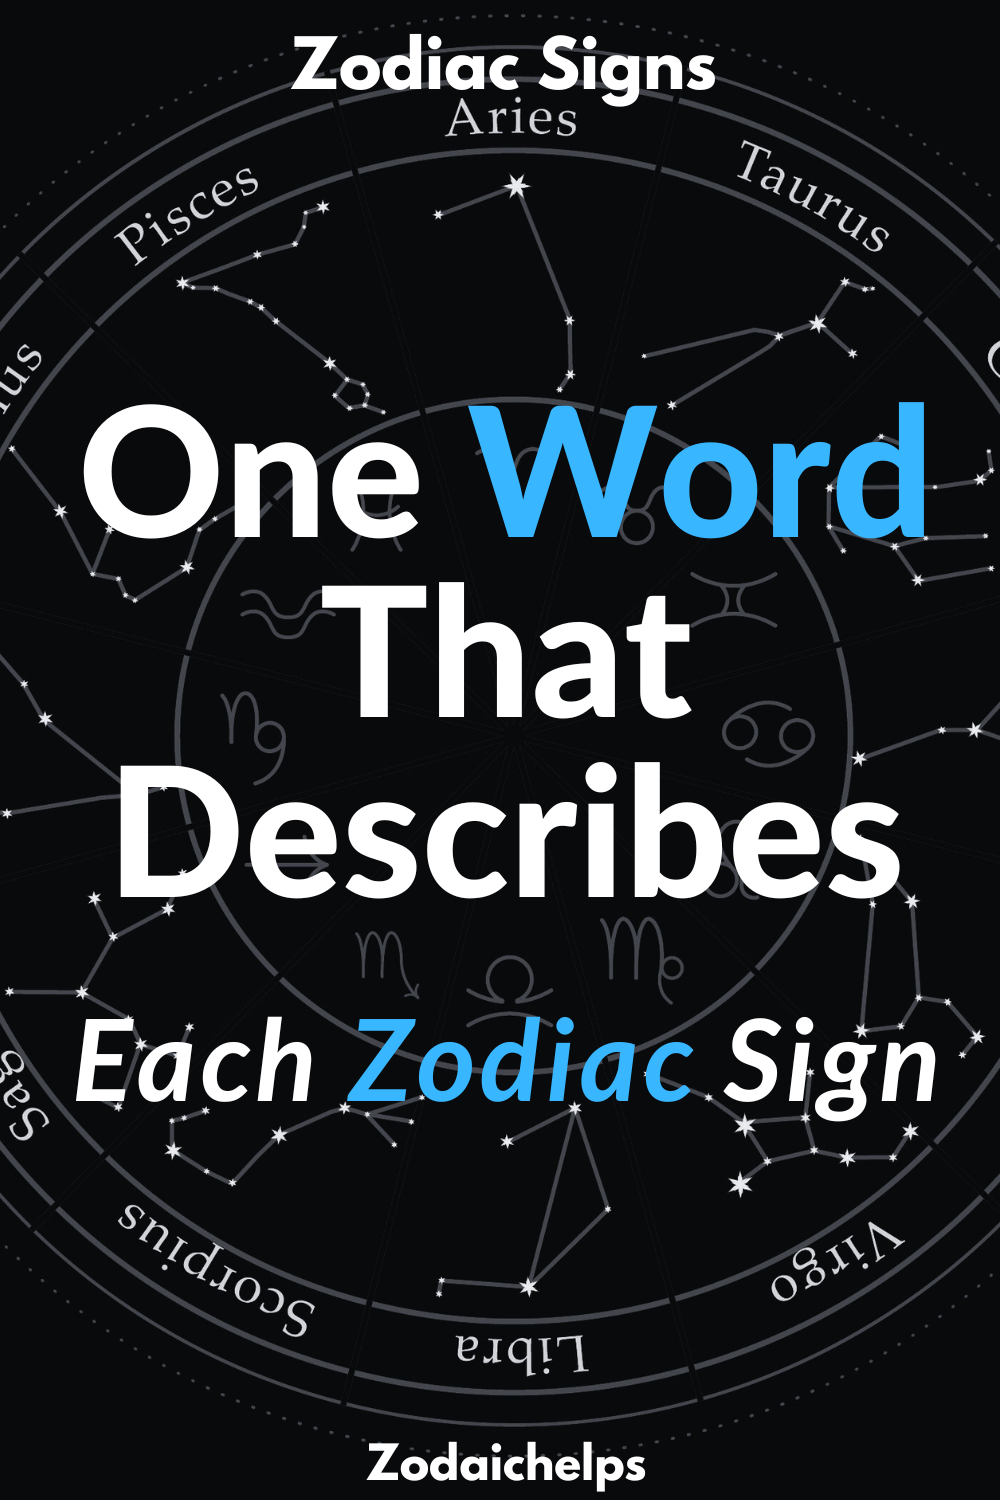 One Word That Describes Each Zodiac Sign